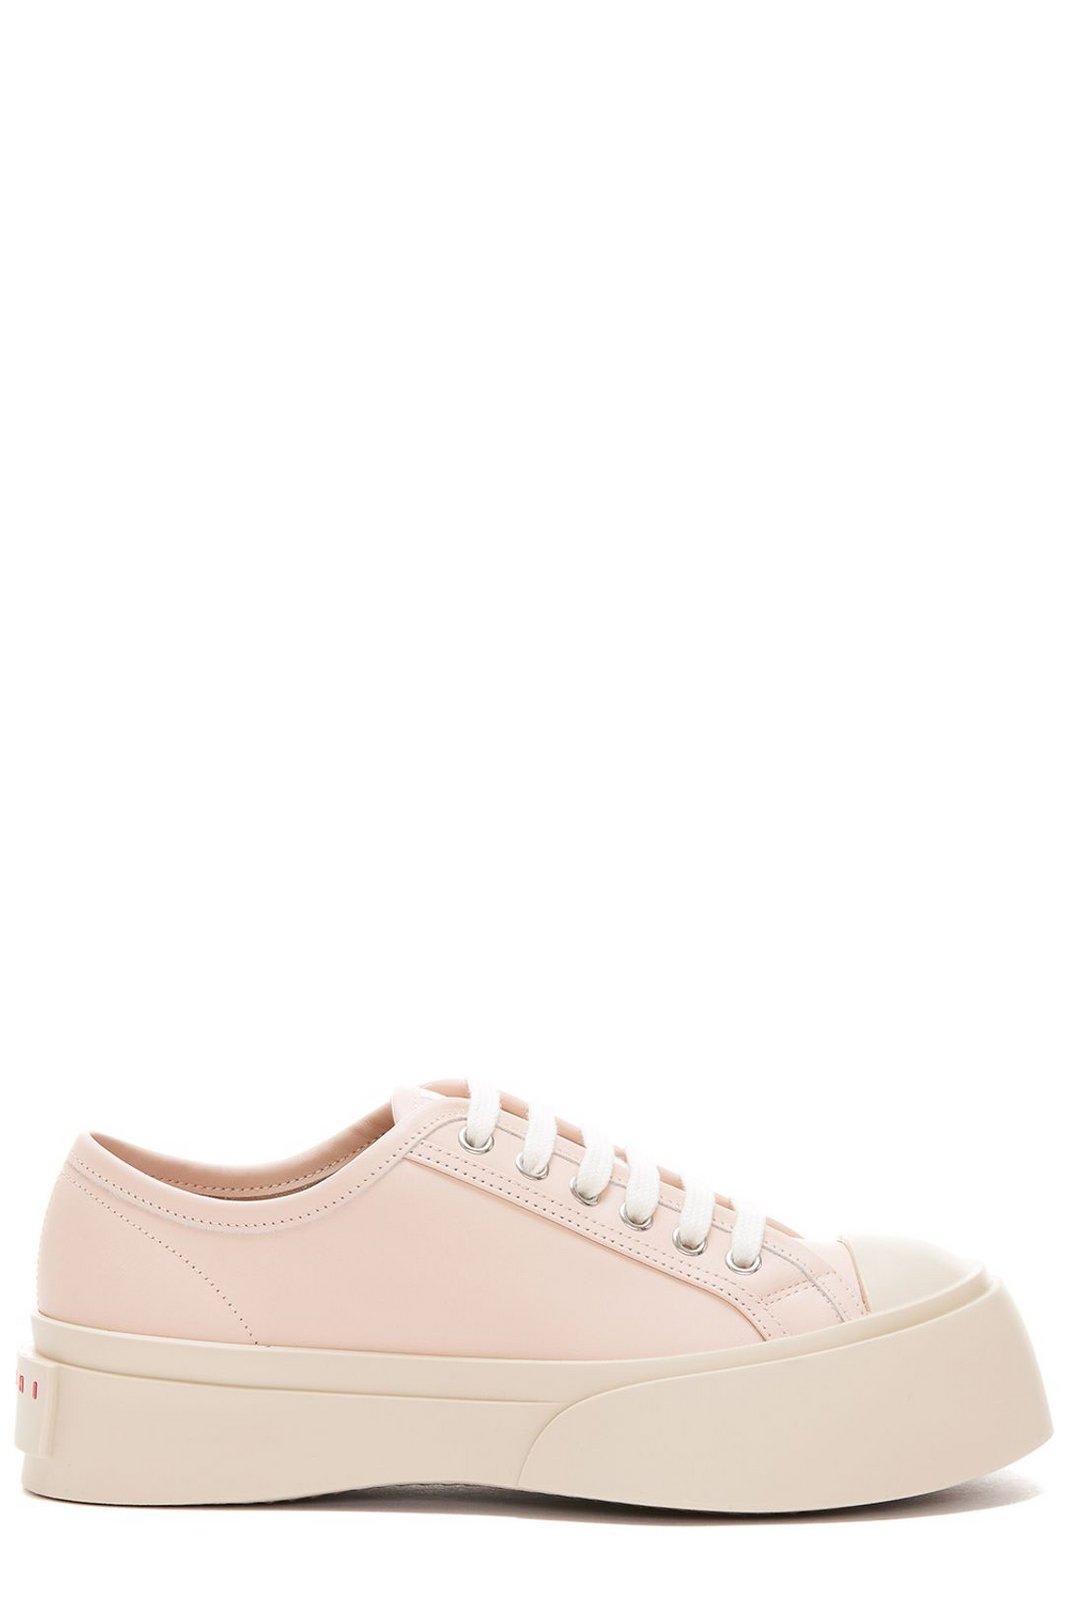 Marni Pablo Chunky Sole Sneakers